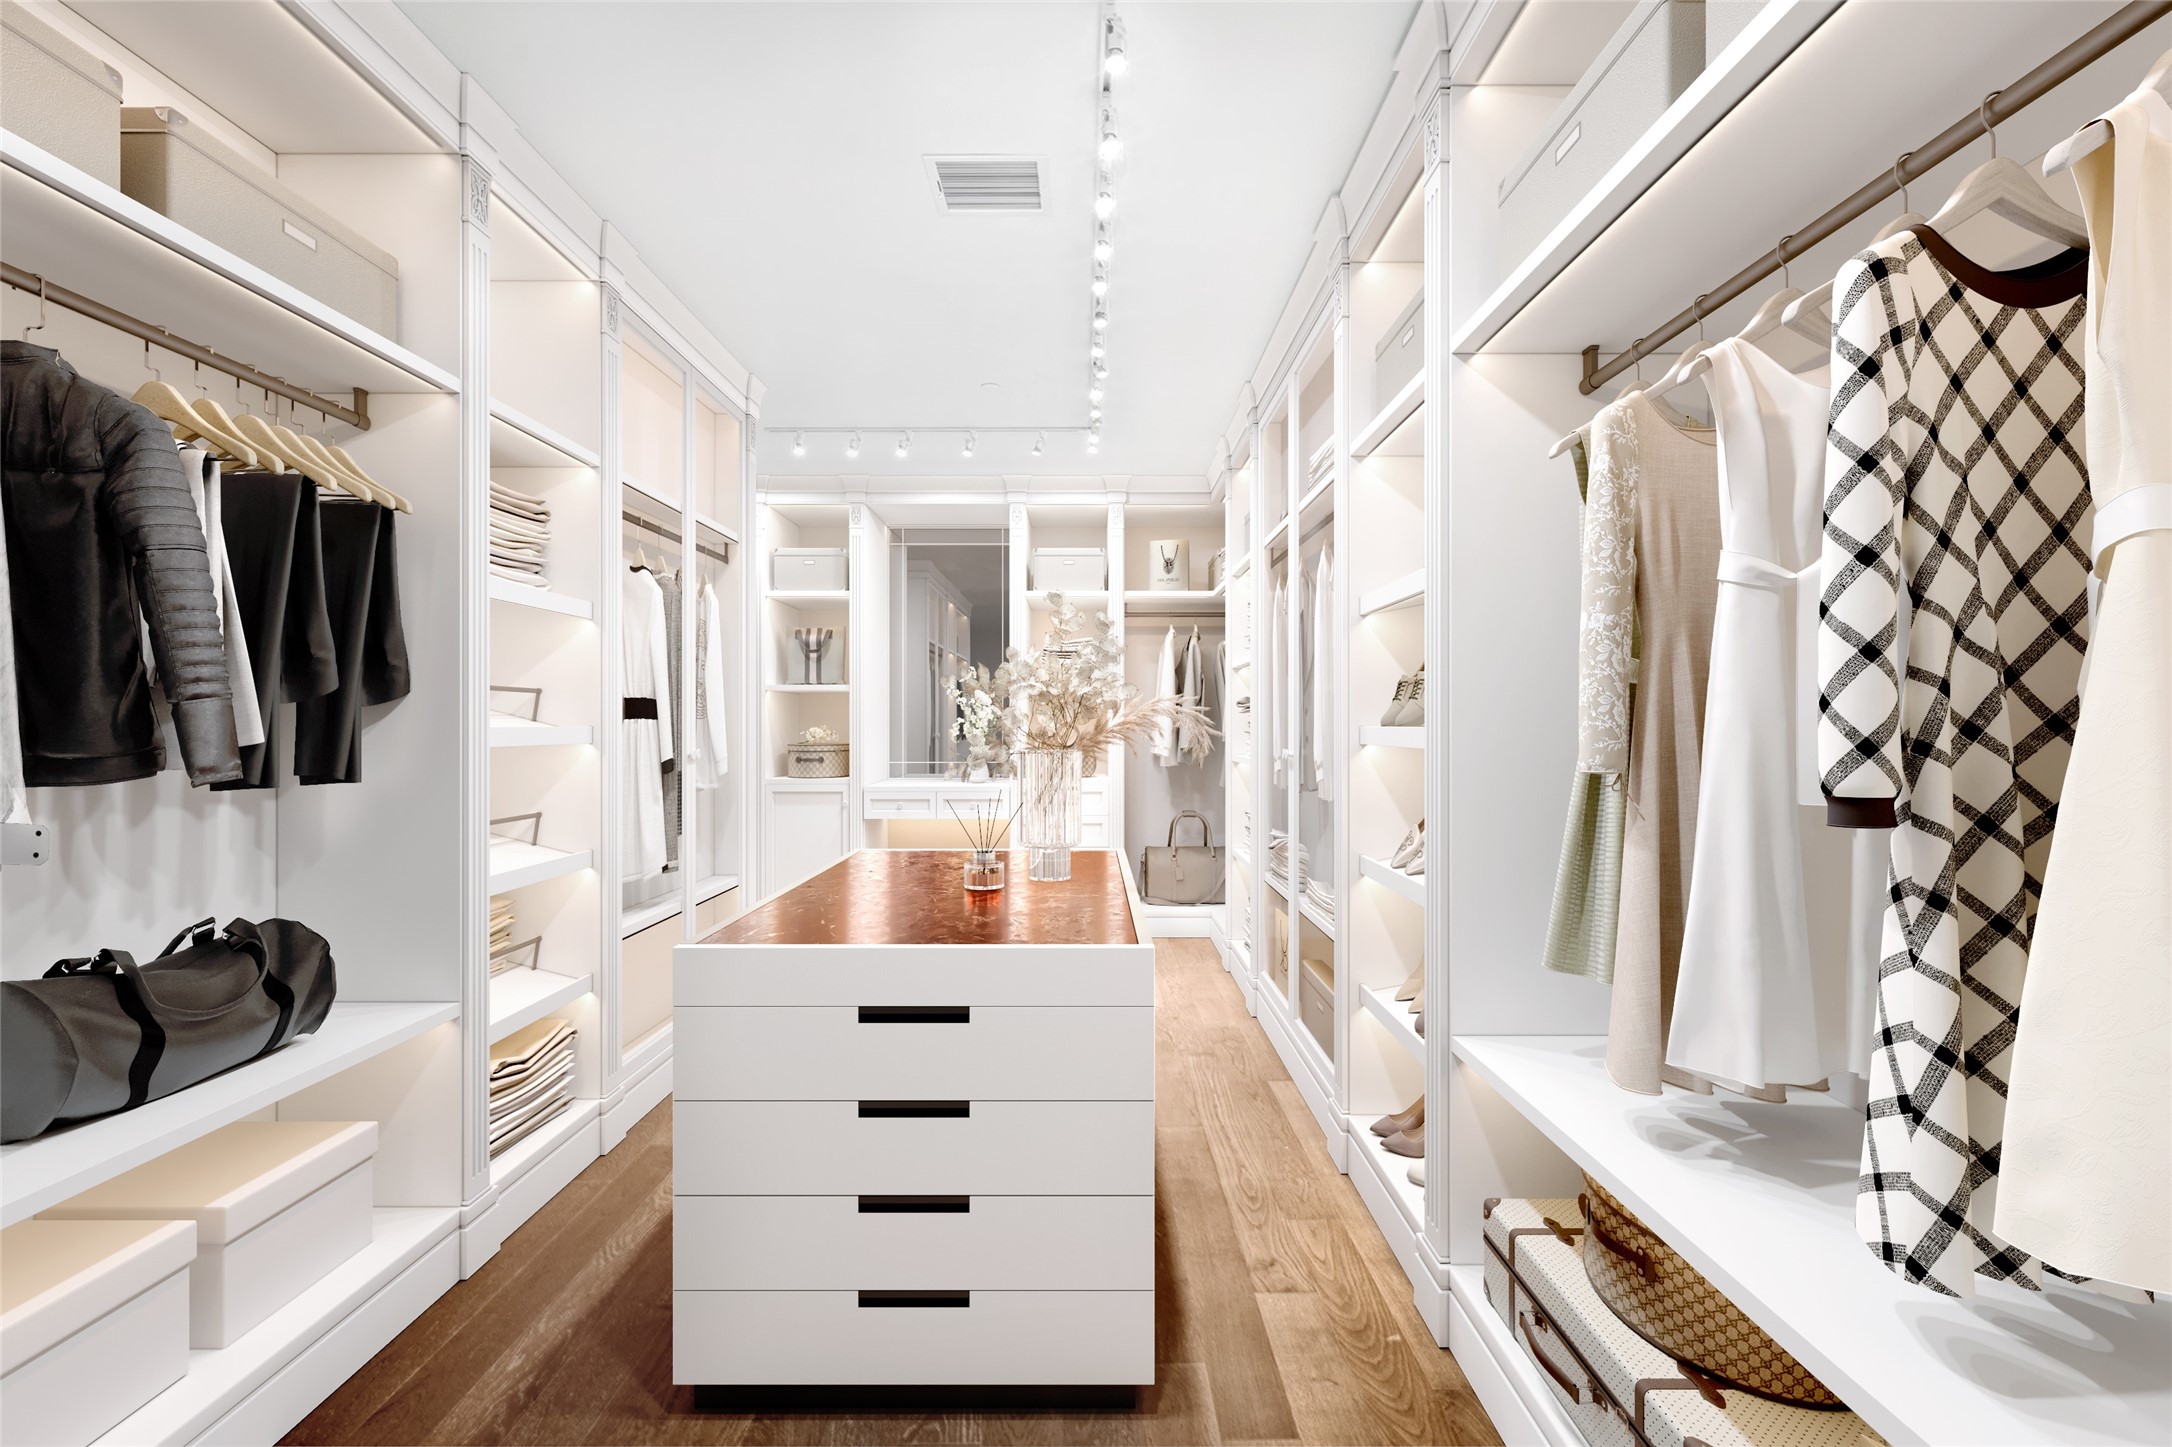 Included in the primary suite is an immense walk-in closet with a boutique type feel. Walk inside a sprawling L-shaped canvas primed for built-in customization, and illuminated by studio lighting. This is a rendering.